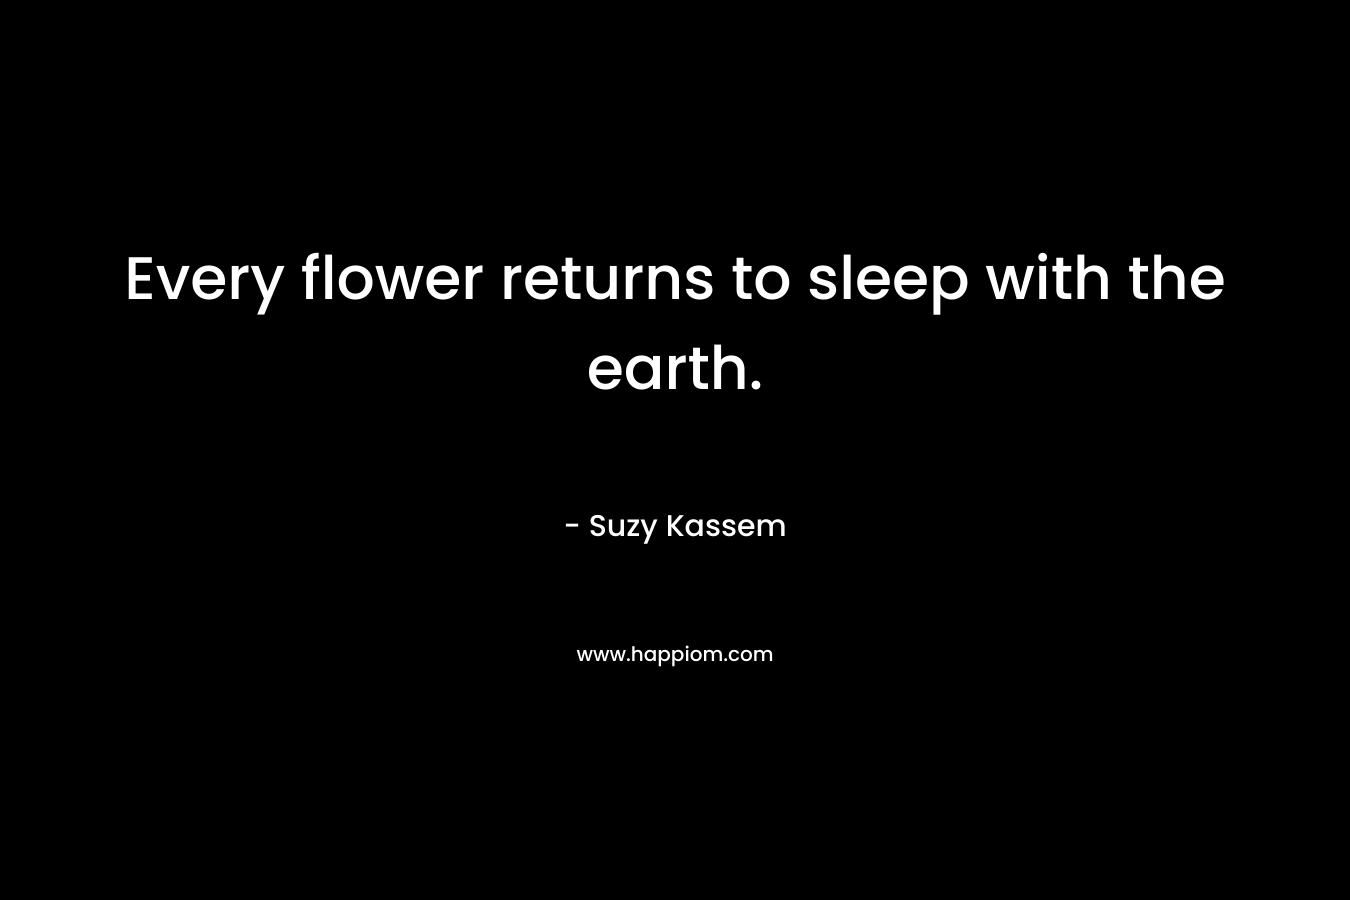 Every flower returns to sleep with the earth. – Suzy Kassem